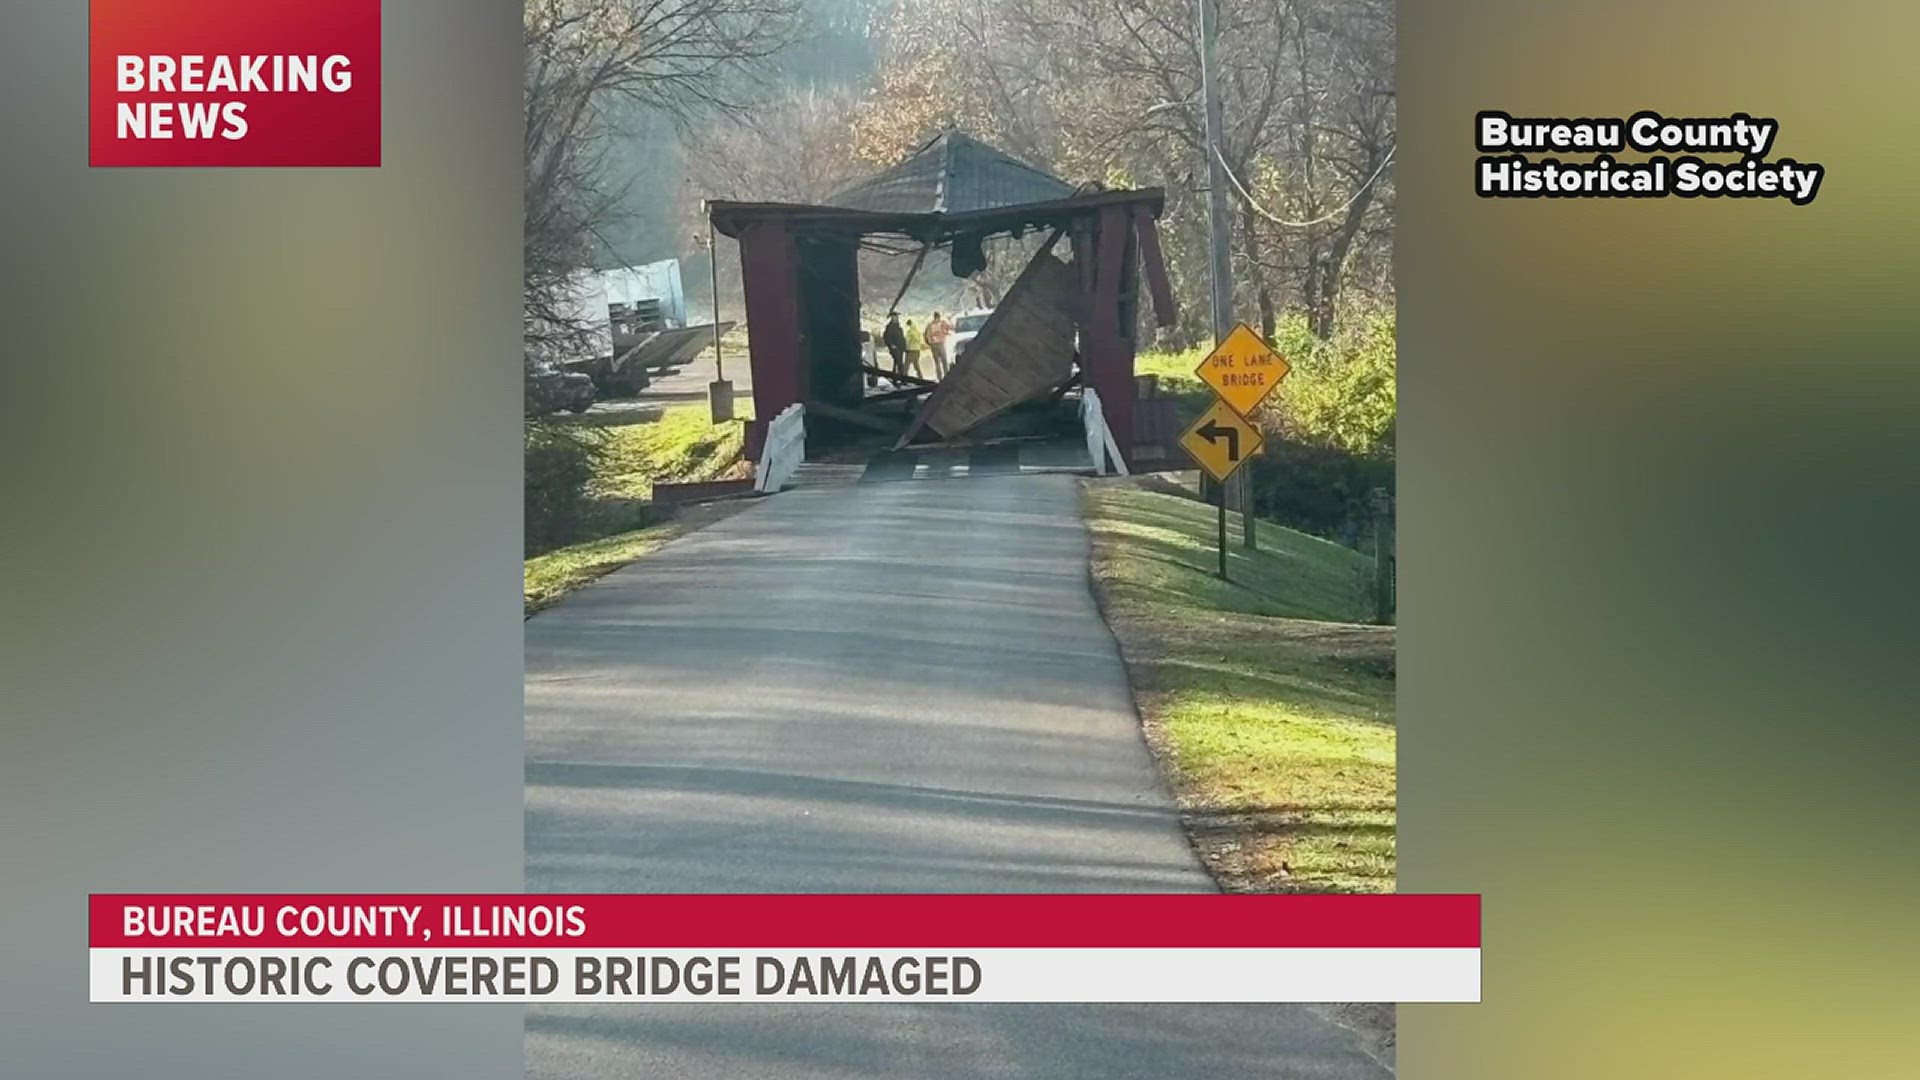 Prior to today's accident, the bridge was one of five covered bridges in Illinois that was still open to vehicular traffic.